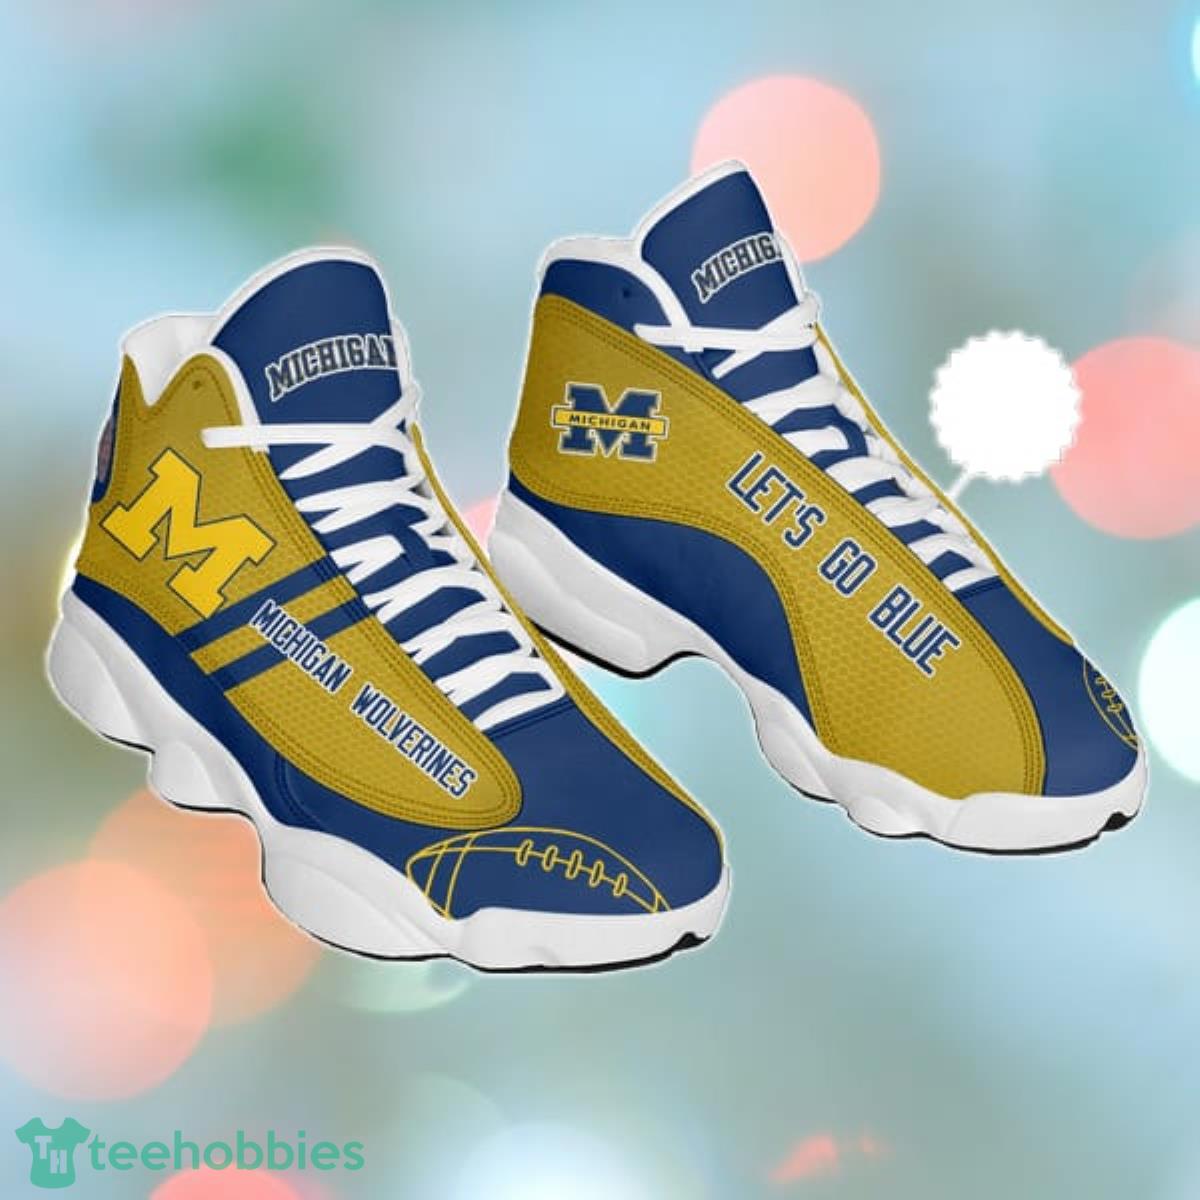 Michigan Wolverines Air Jordan 13 Sneakers Special Gift For Men And Women Product Photo 2